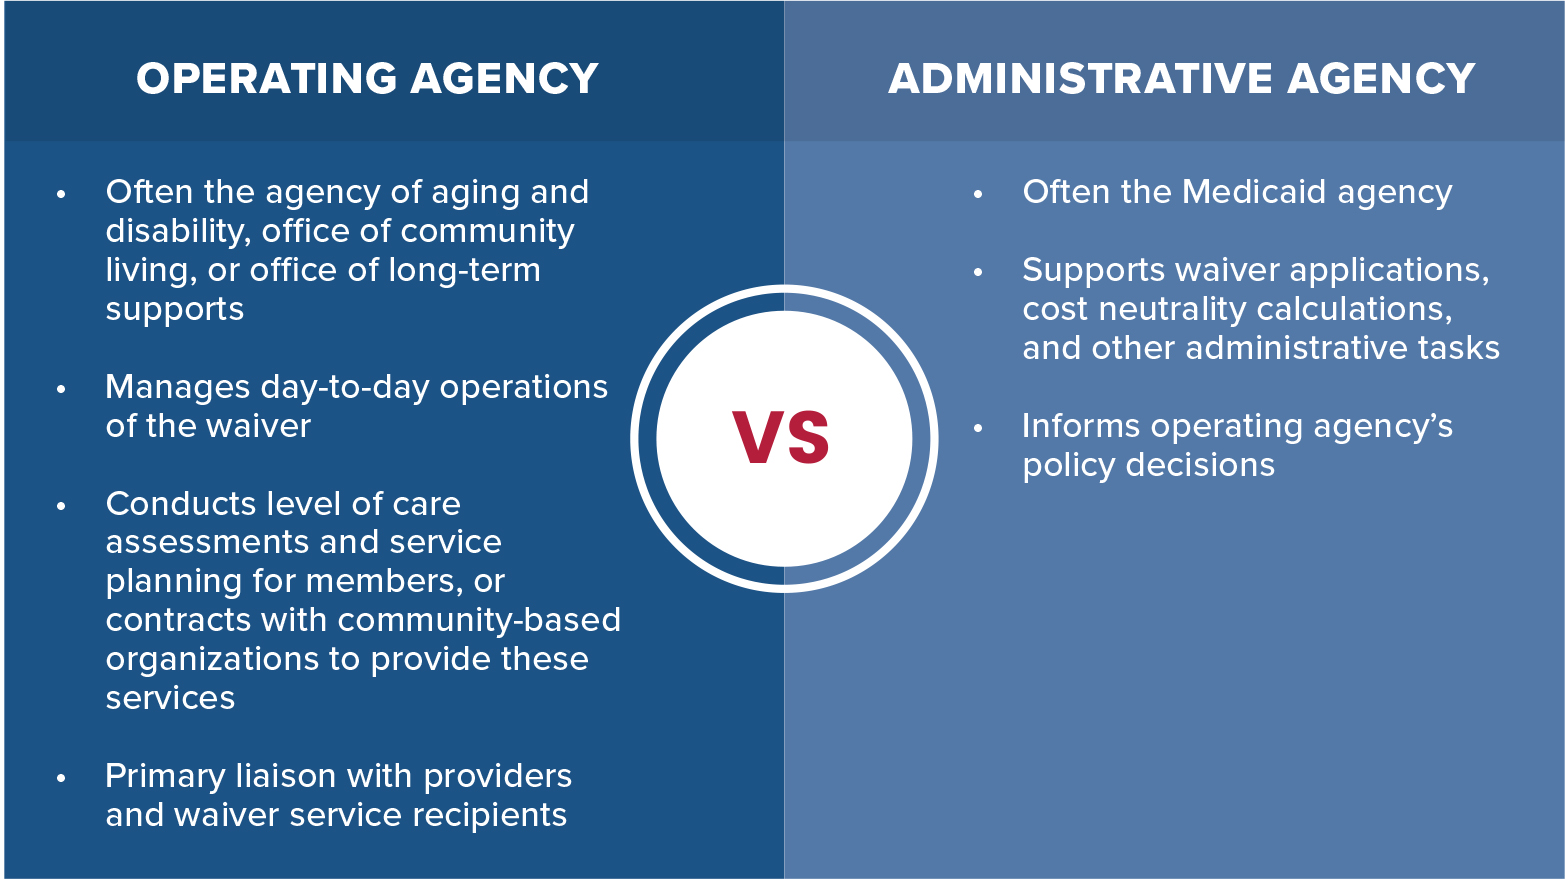 Information on how home and community based services are offered under an operating agency structure versus an administrative agency structure